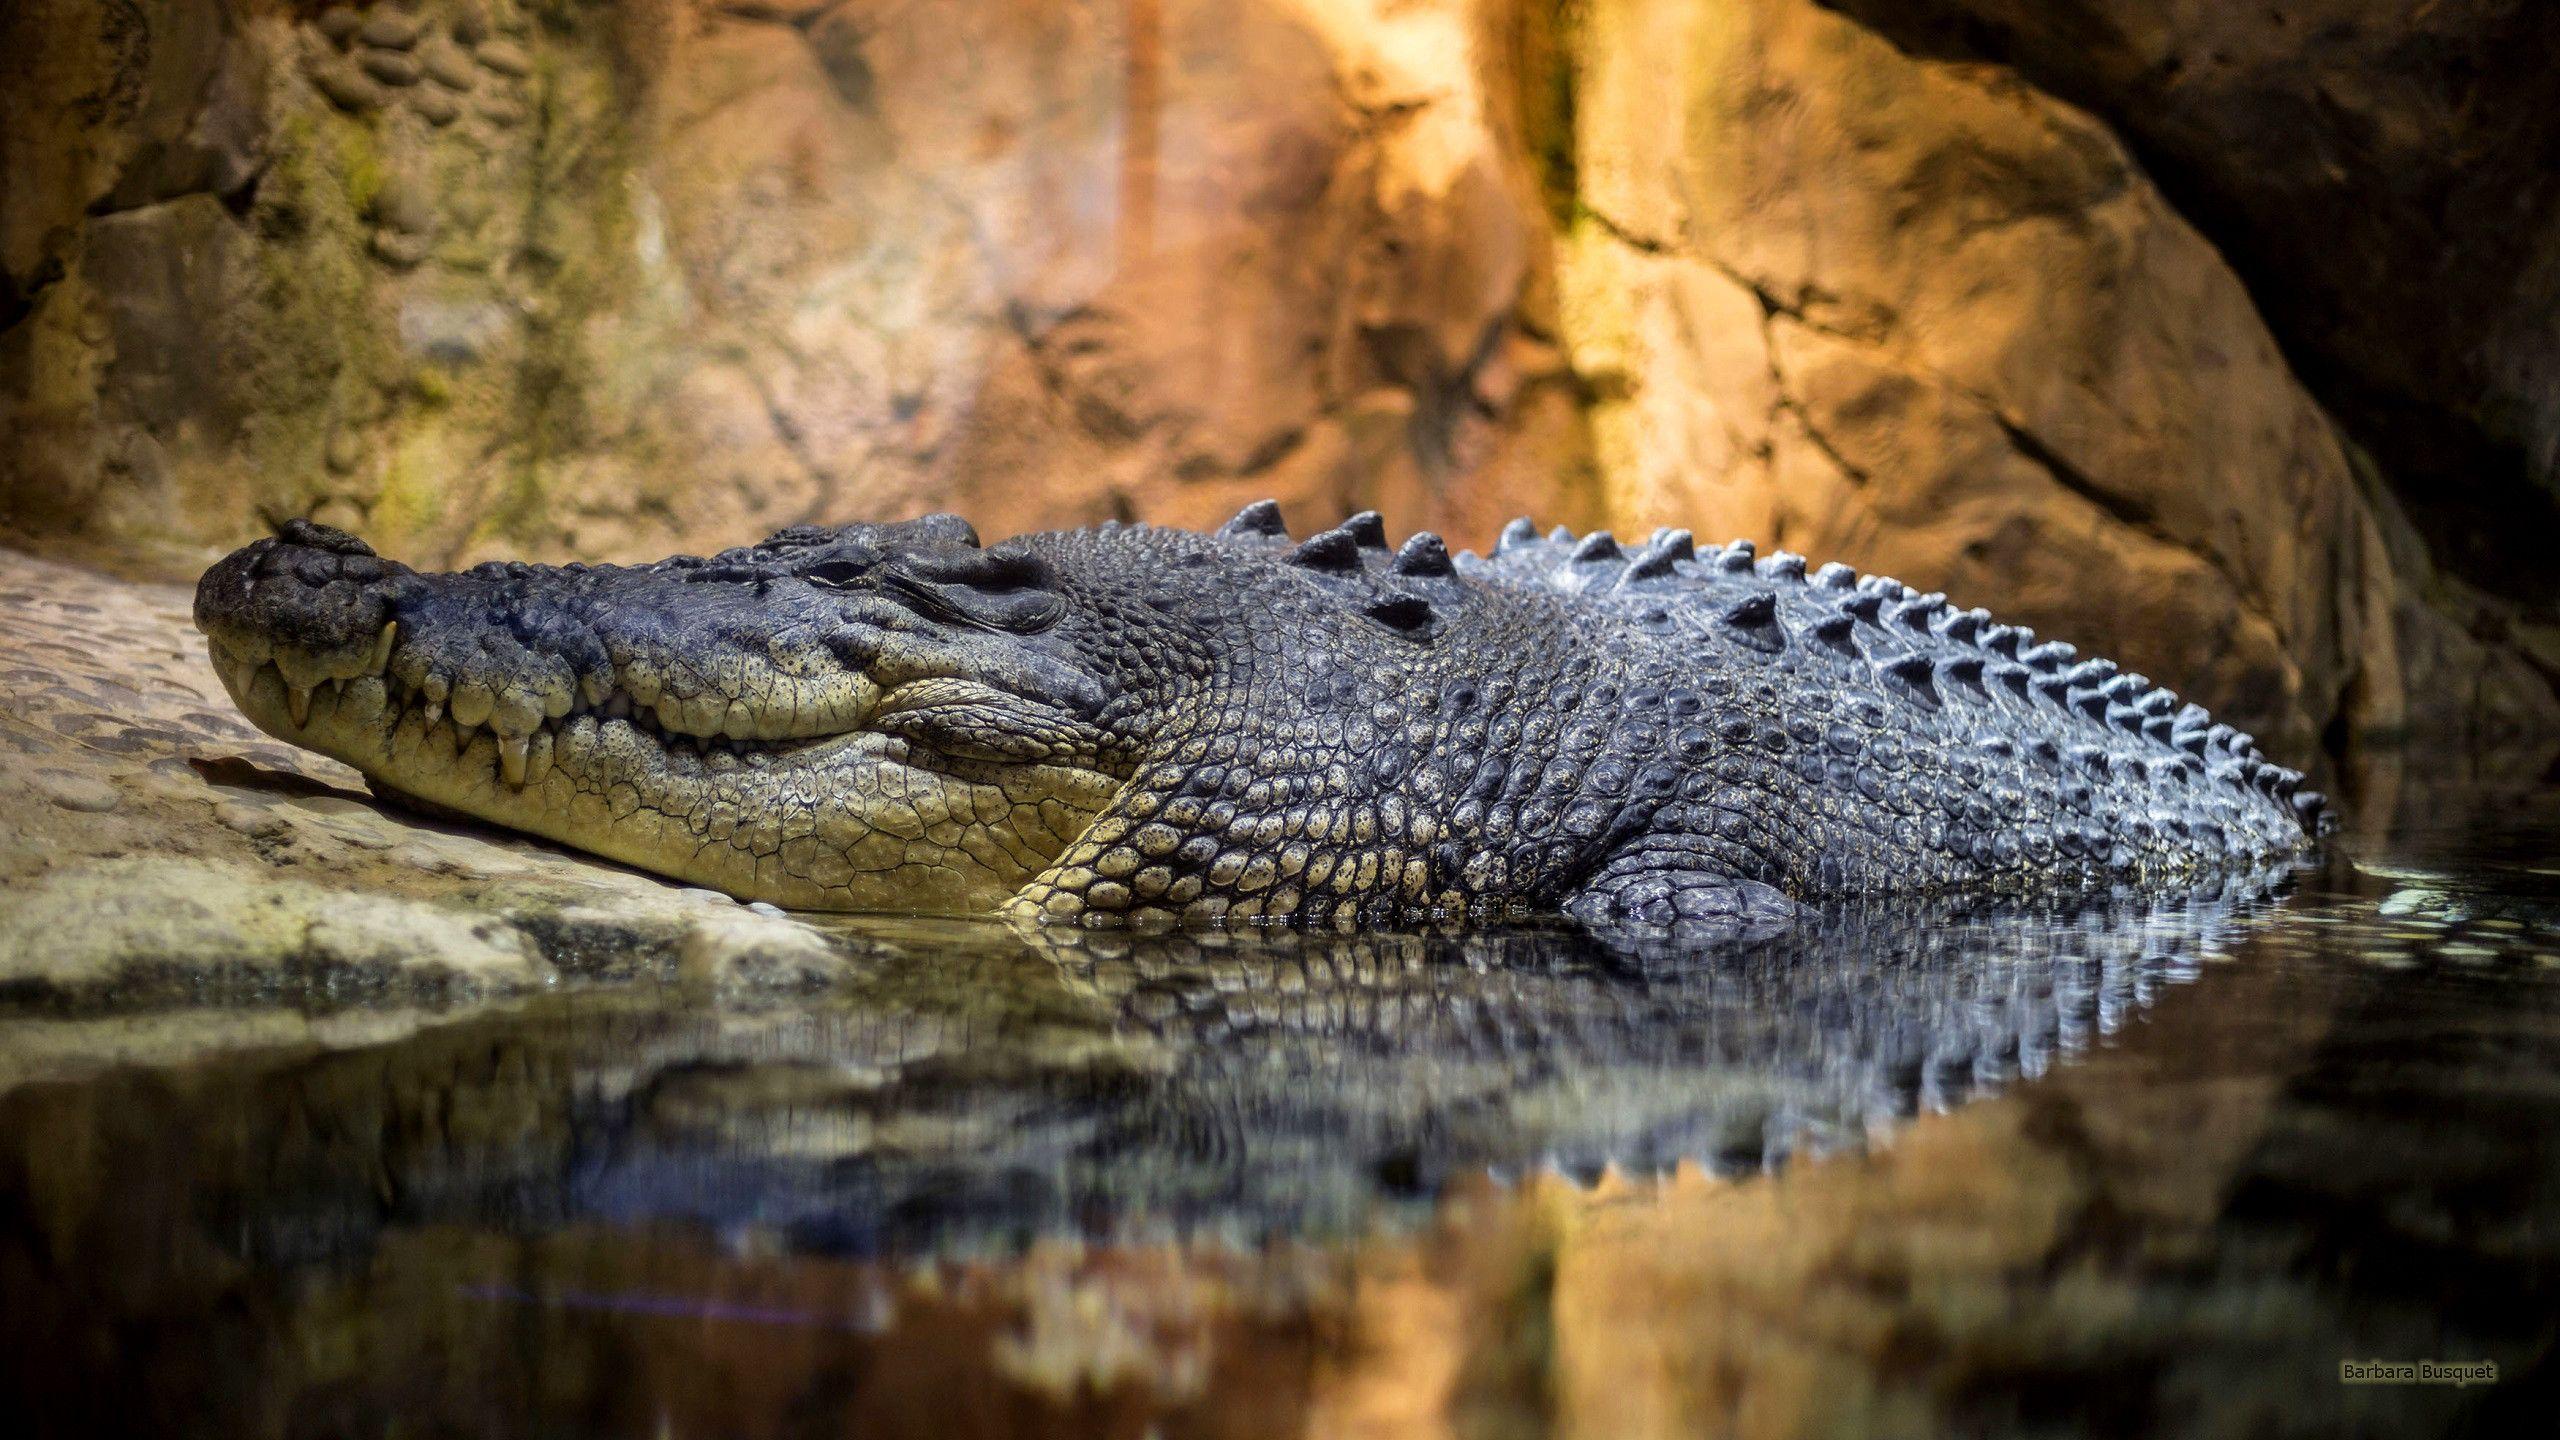 Saltwater crocodile wallpapers HD | Download Free backgrounds